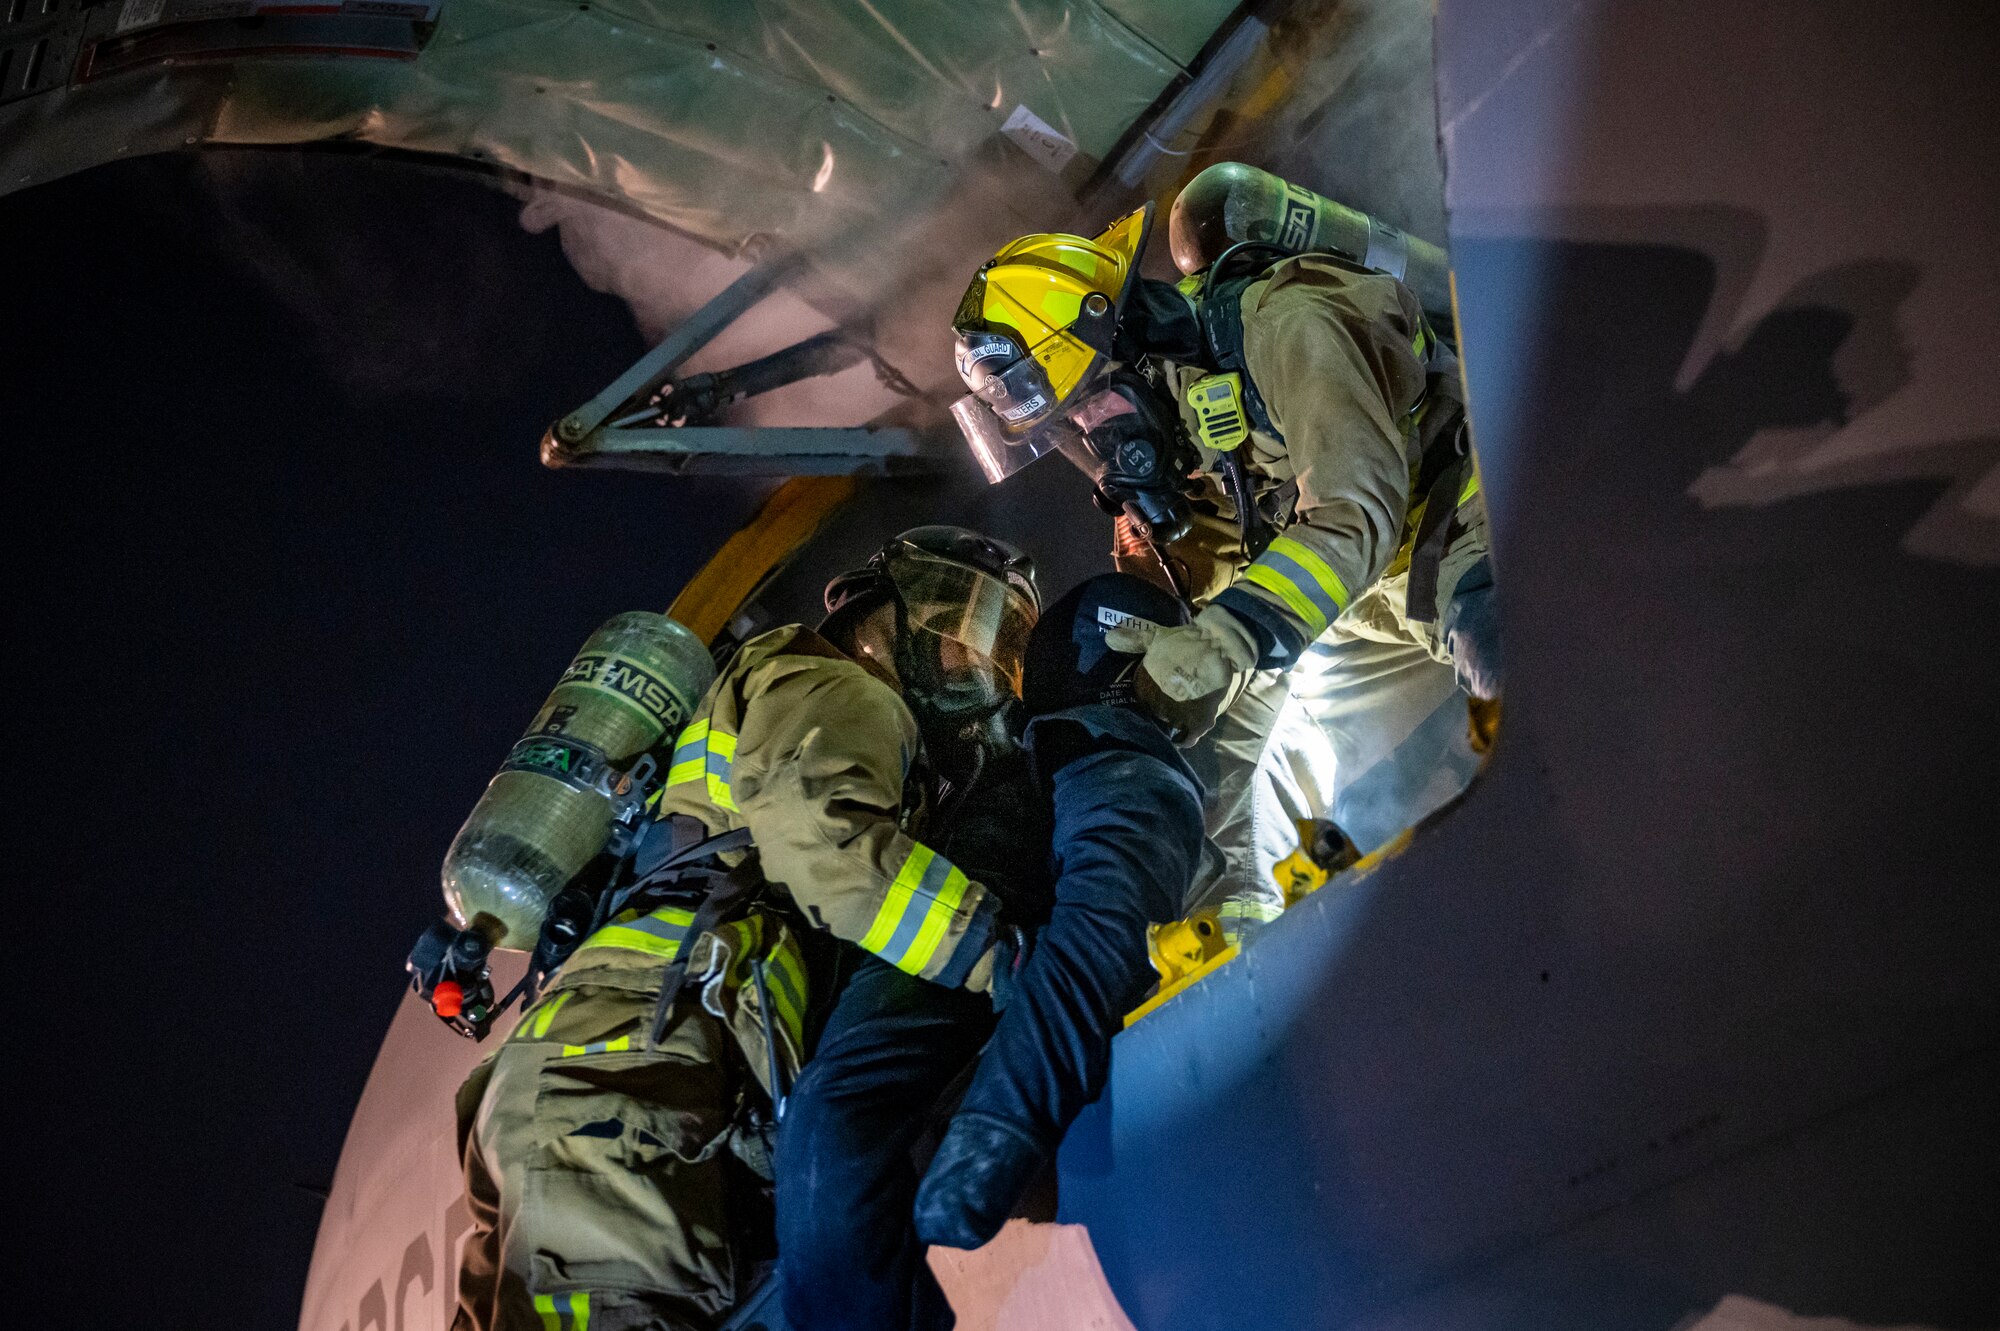 Military members in firefighter gear carry a mannequin out of a KC-135